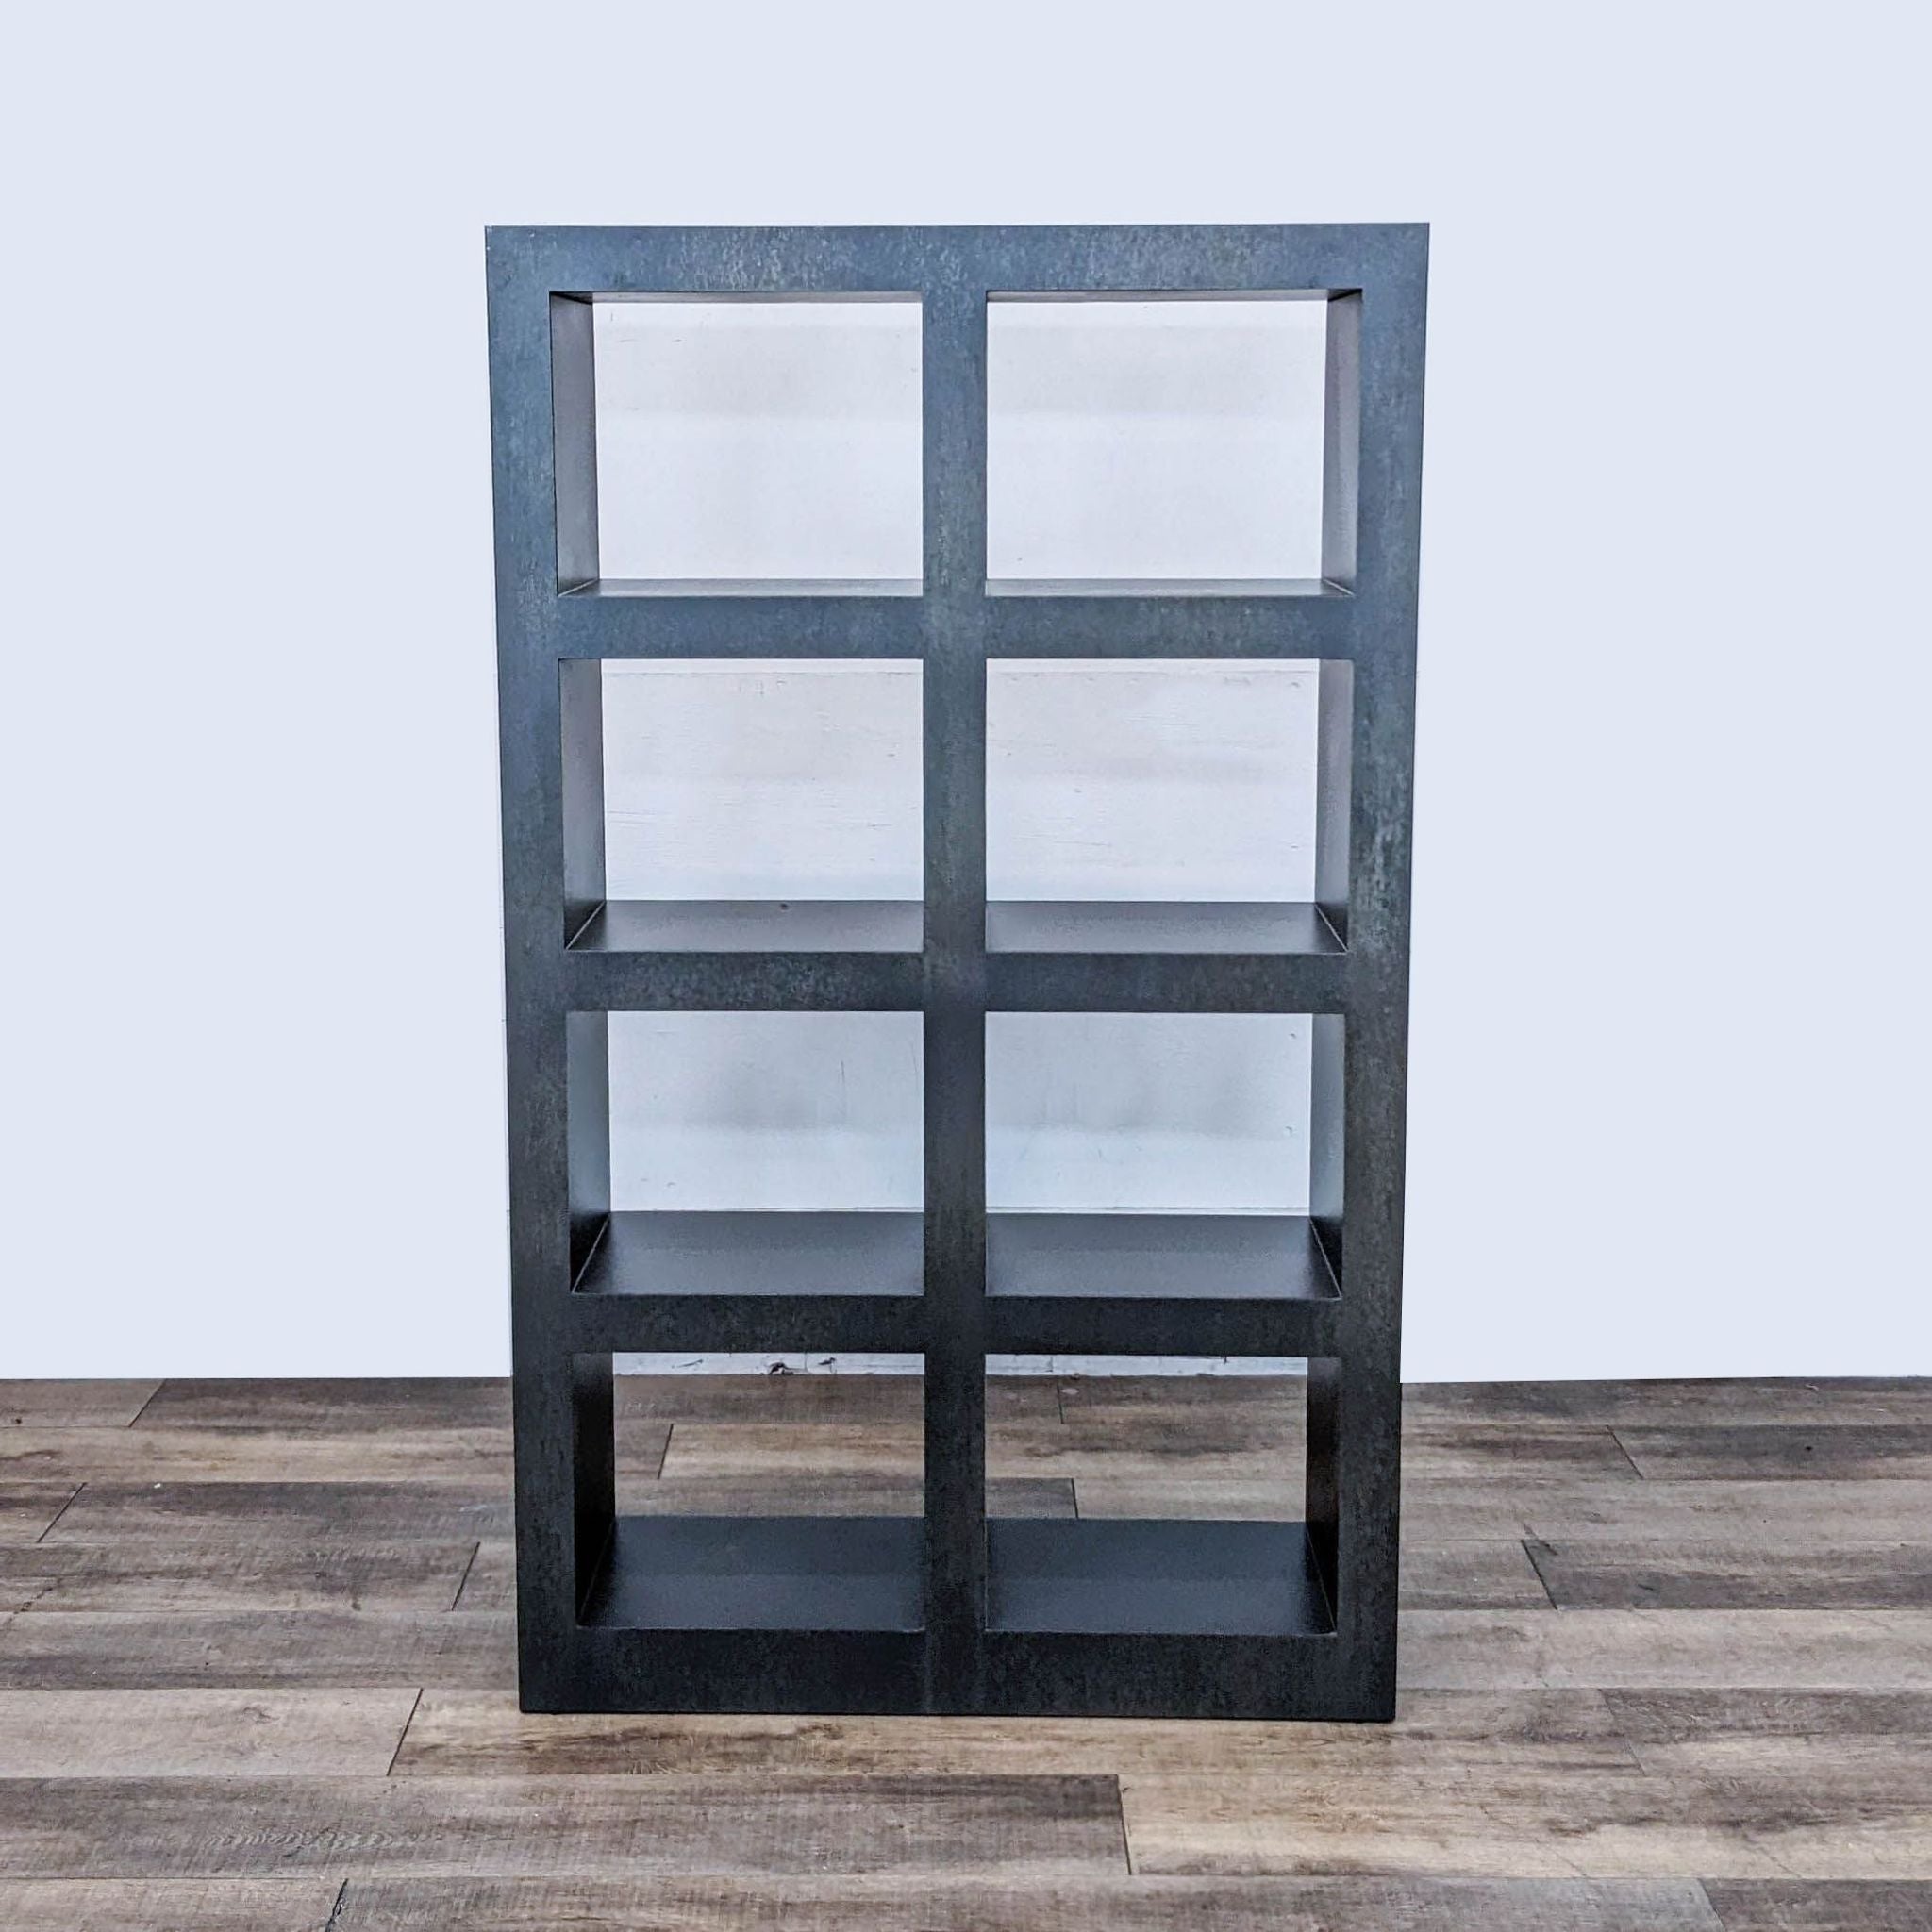 Crate and Barrel steel bookshelf with graphite lacquer finish, shown in frontal view on a wooden floor.